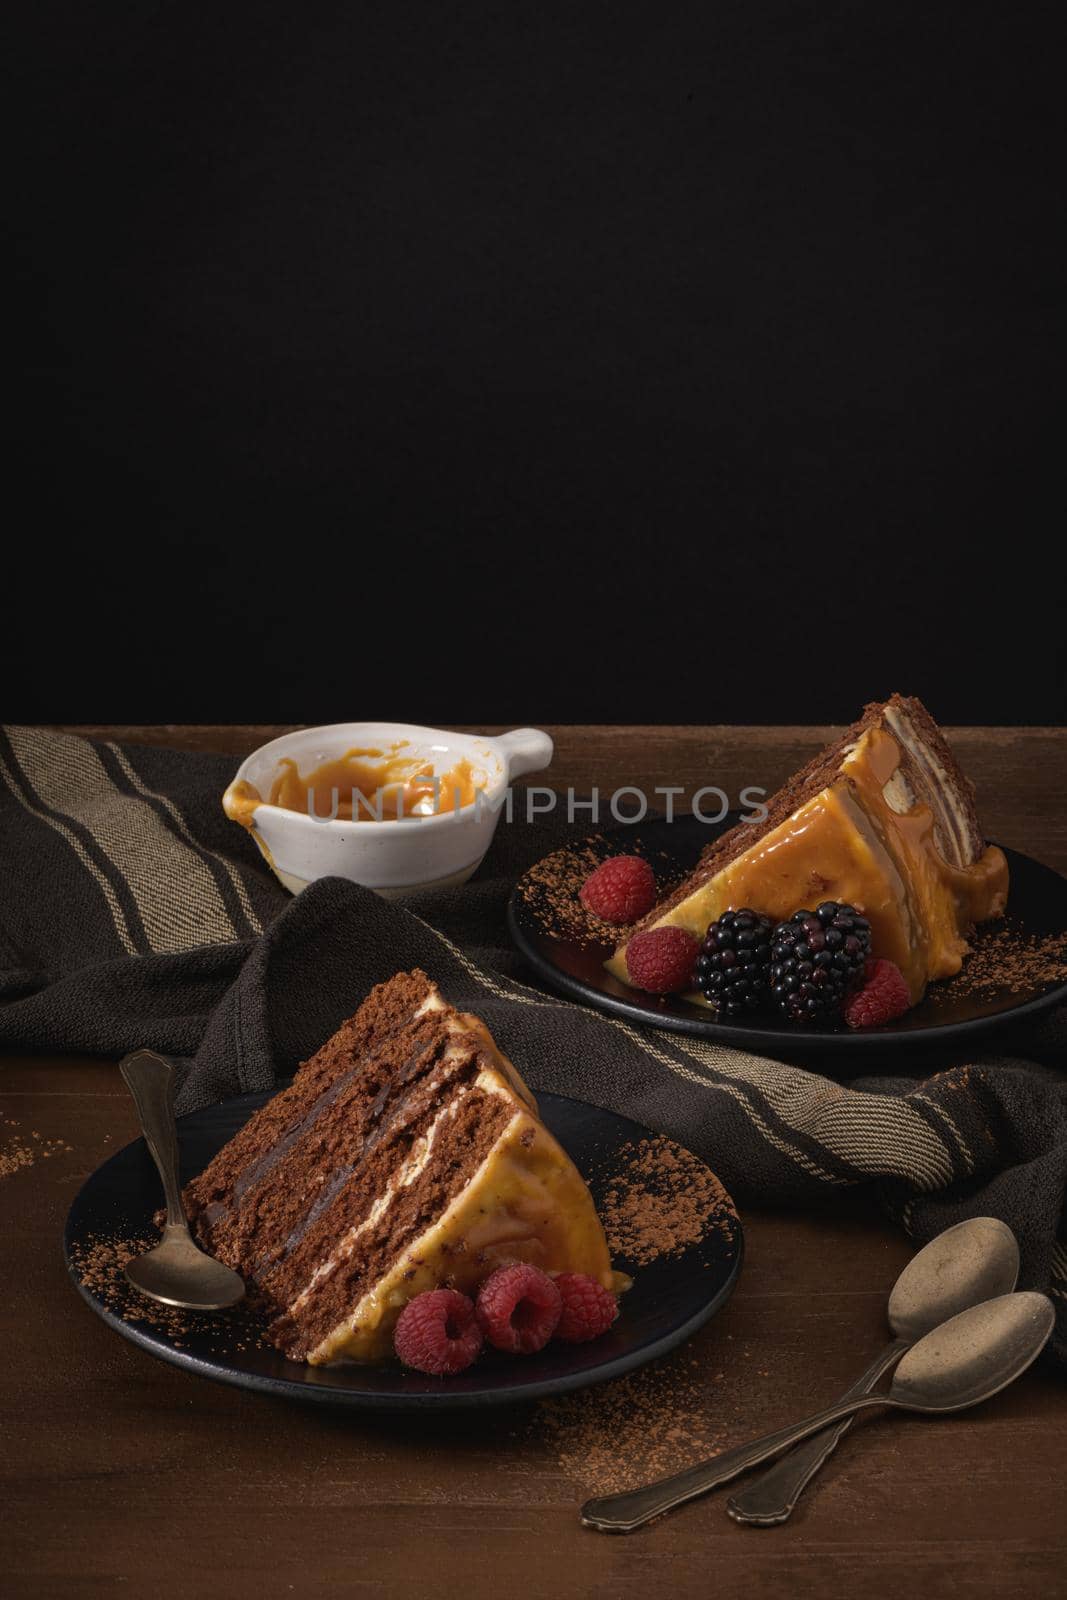 Delicious caramel cake slices with blackberries and raspberries.